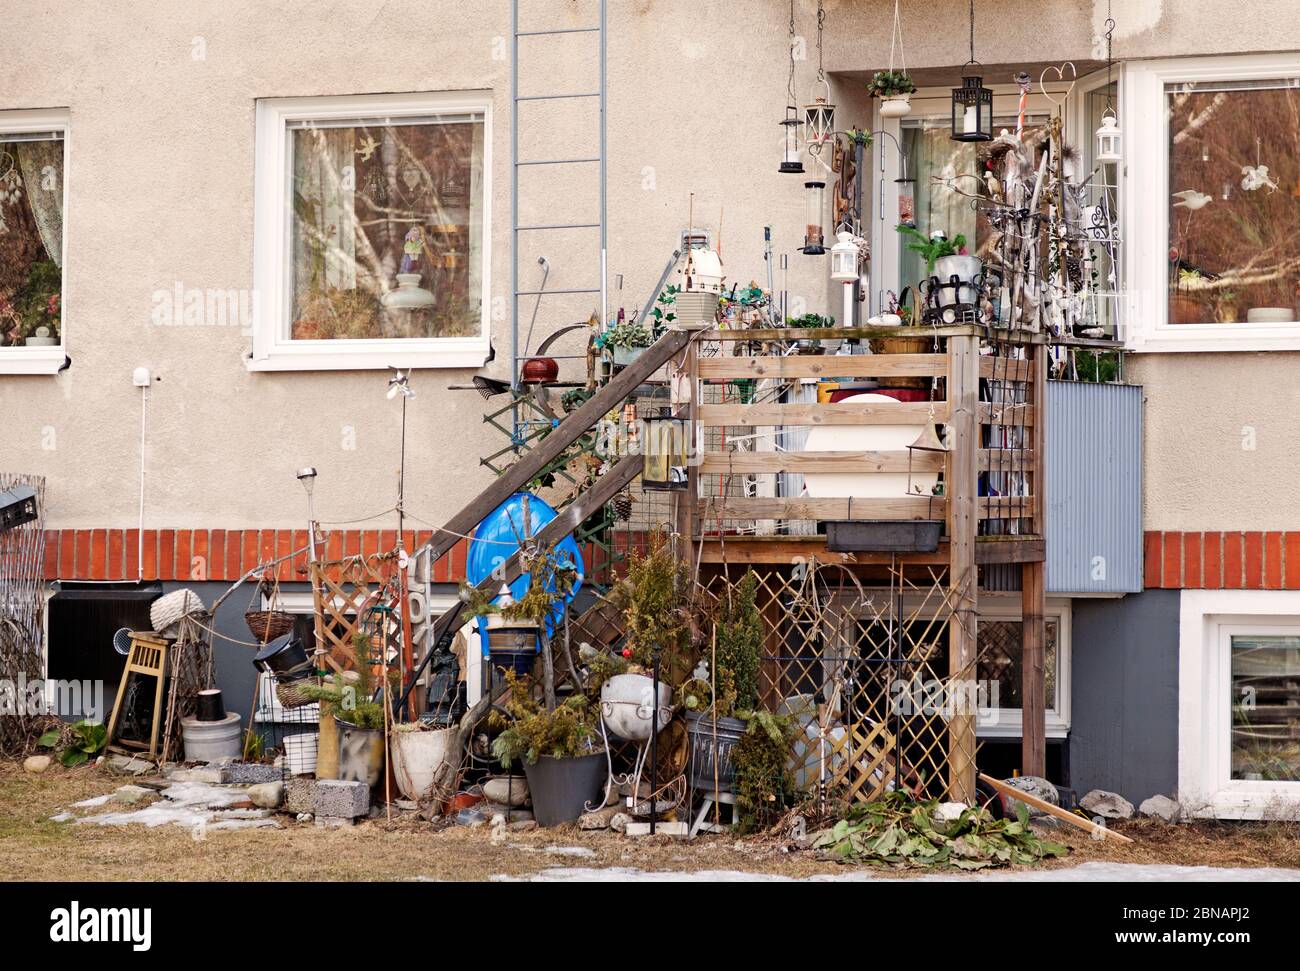 Umea, Norrland Sweden - April 3, 2020: a balcony and patio at Haga with many things Stock Photo